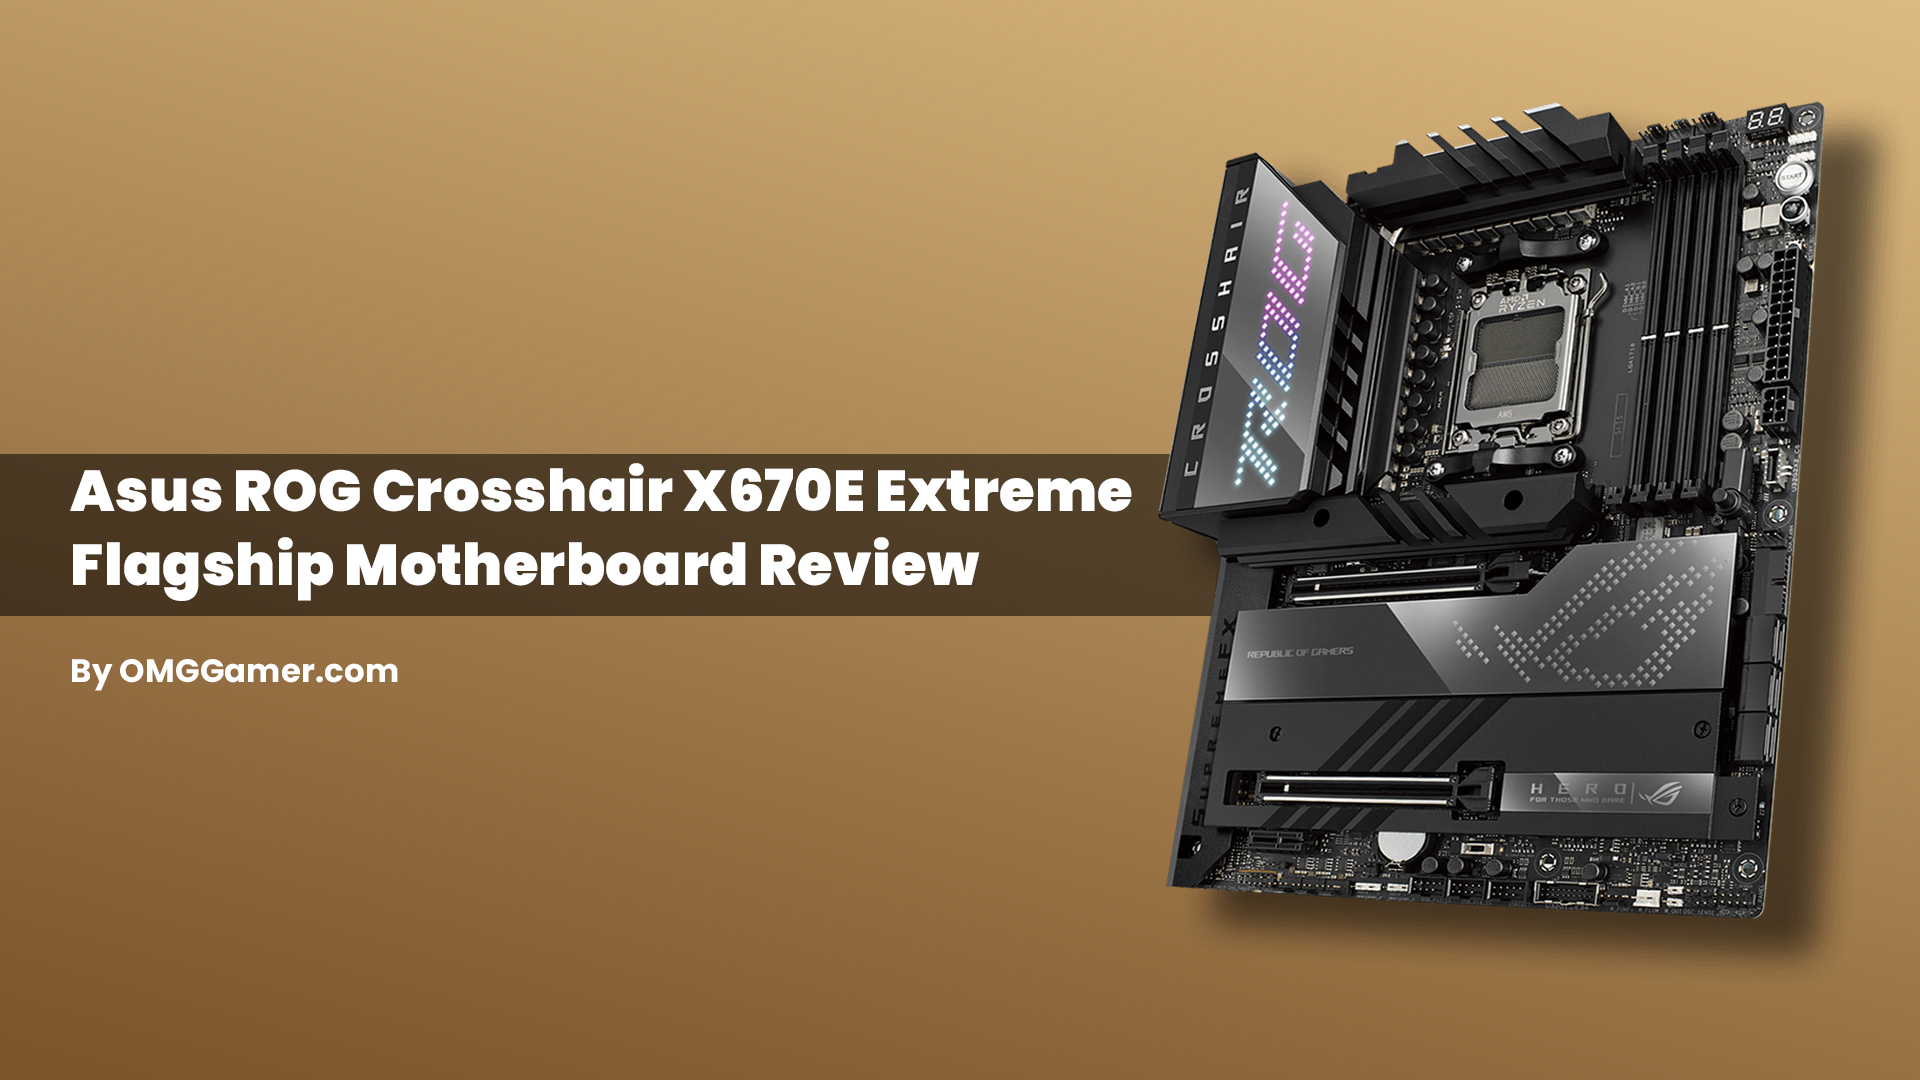 Asus ROG Crosshair X670E Extreme Flagship Motherboard Review